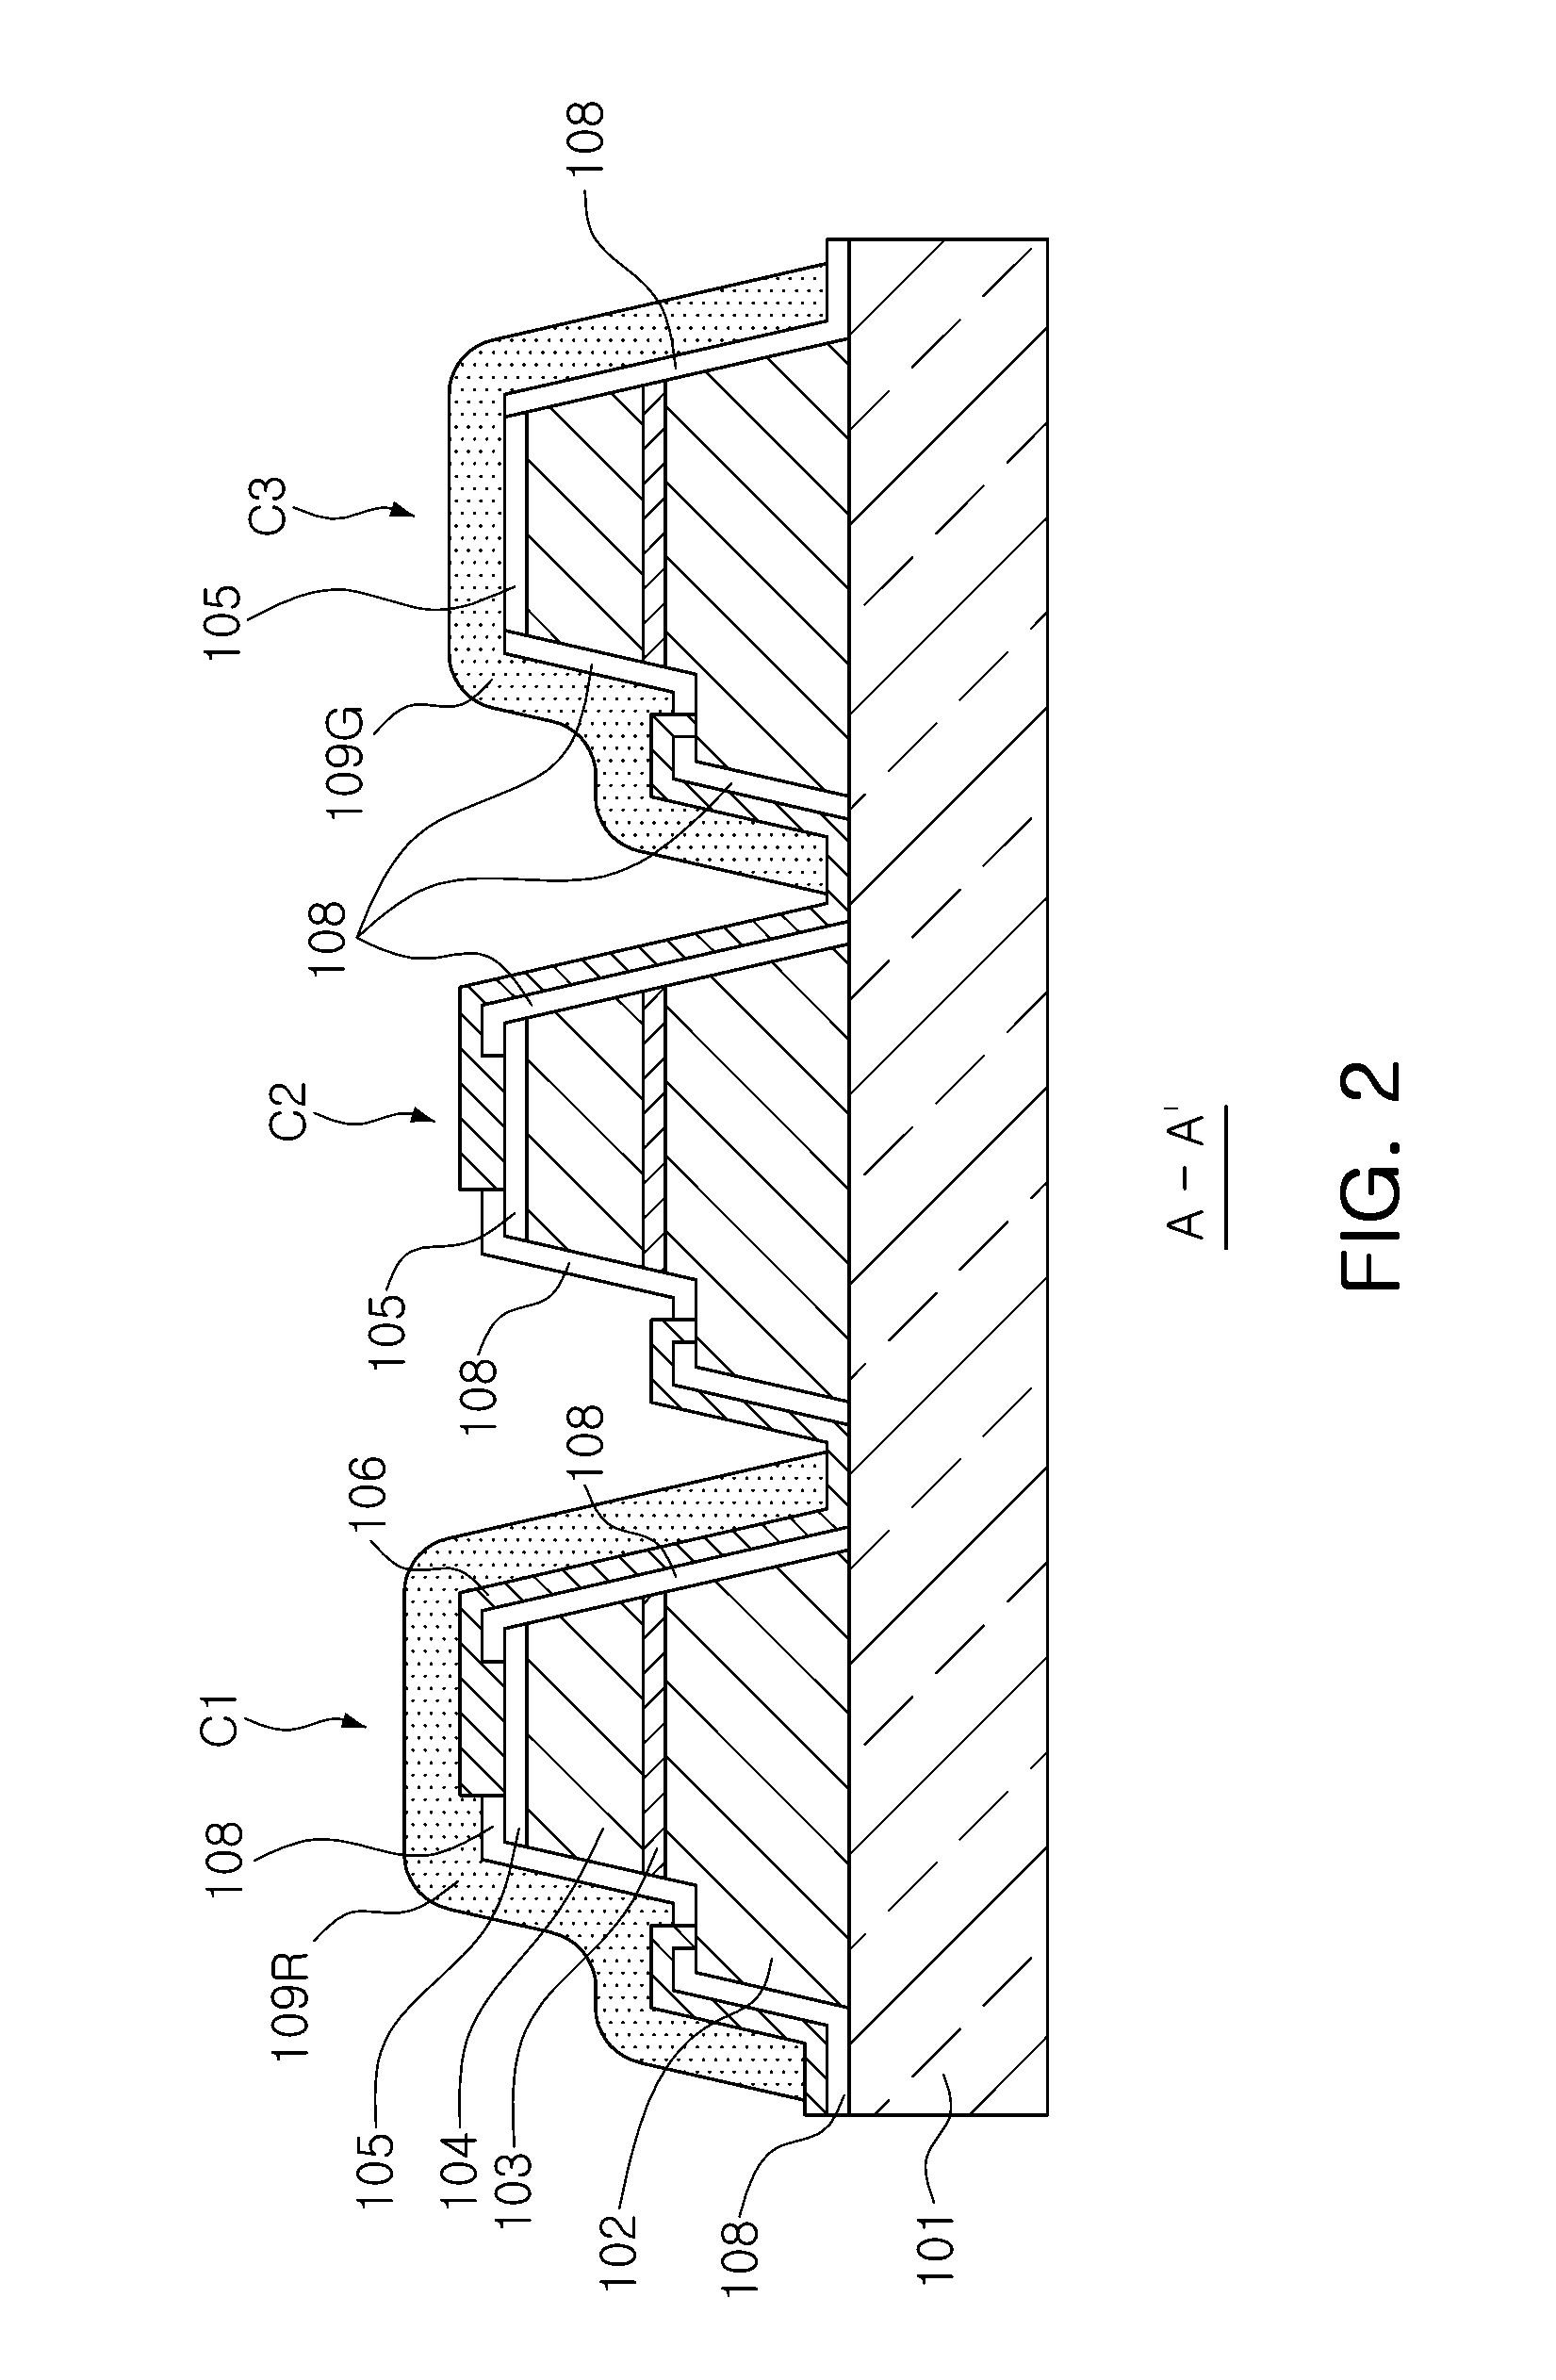 Semiconductor light emitting device having multi-cell array and method for manufacturing the same